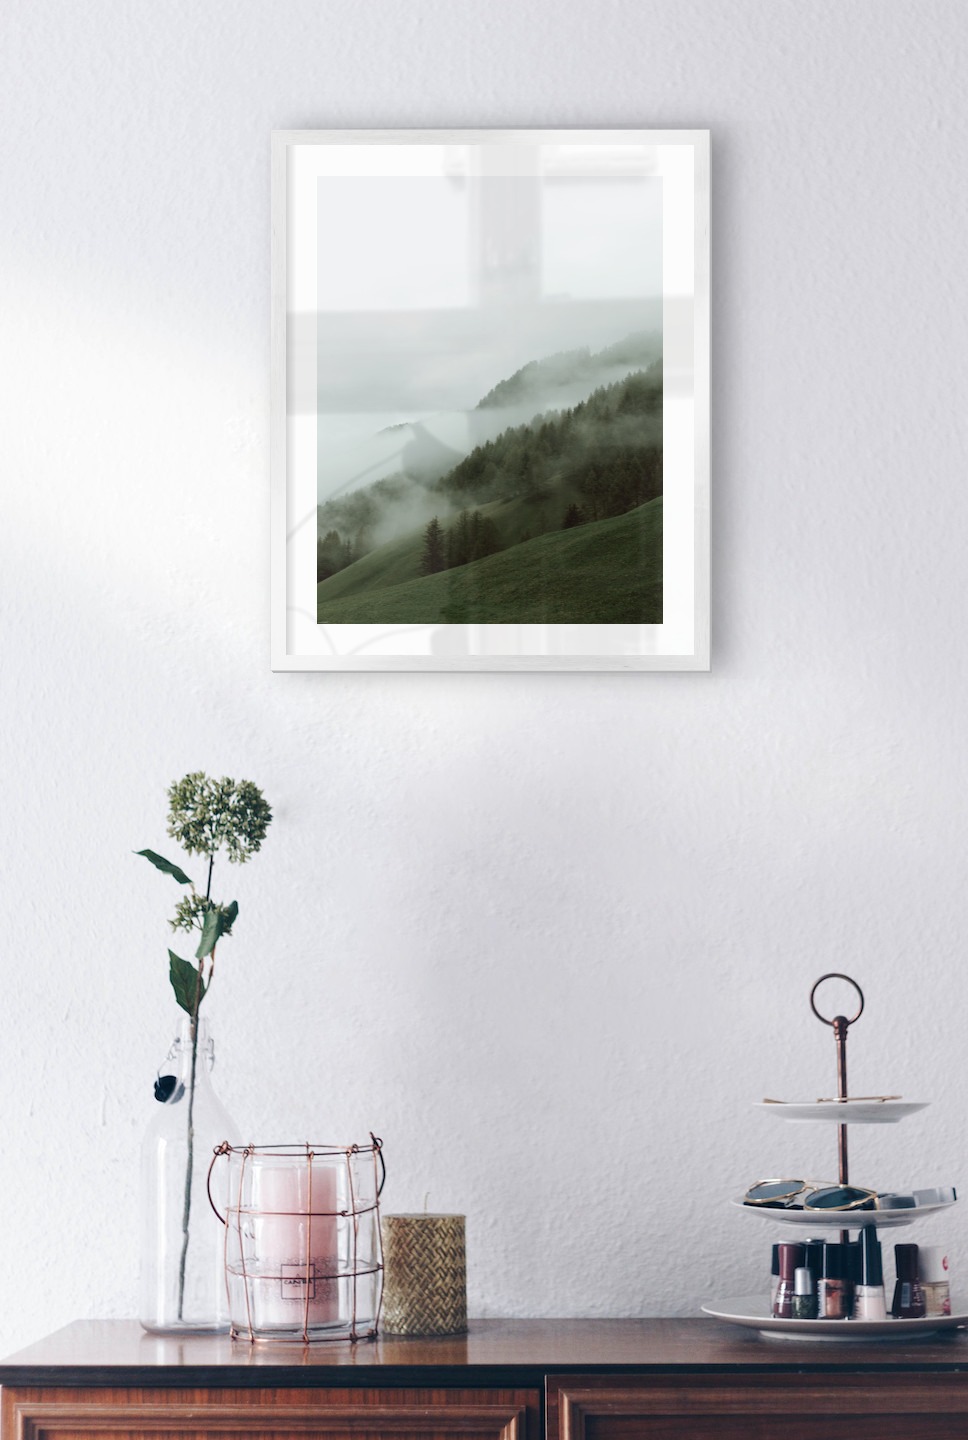 Gallery wall with picture frame in silver in size 40x50 with print "Foggy slope"